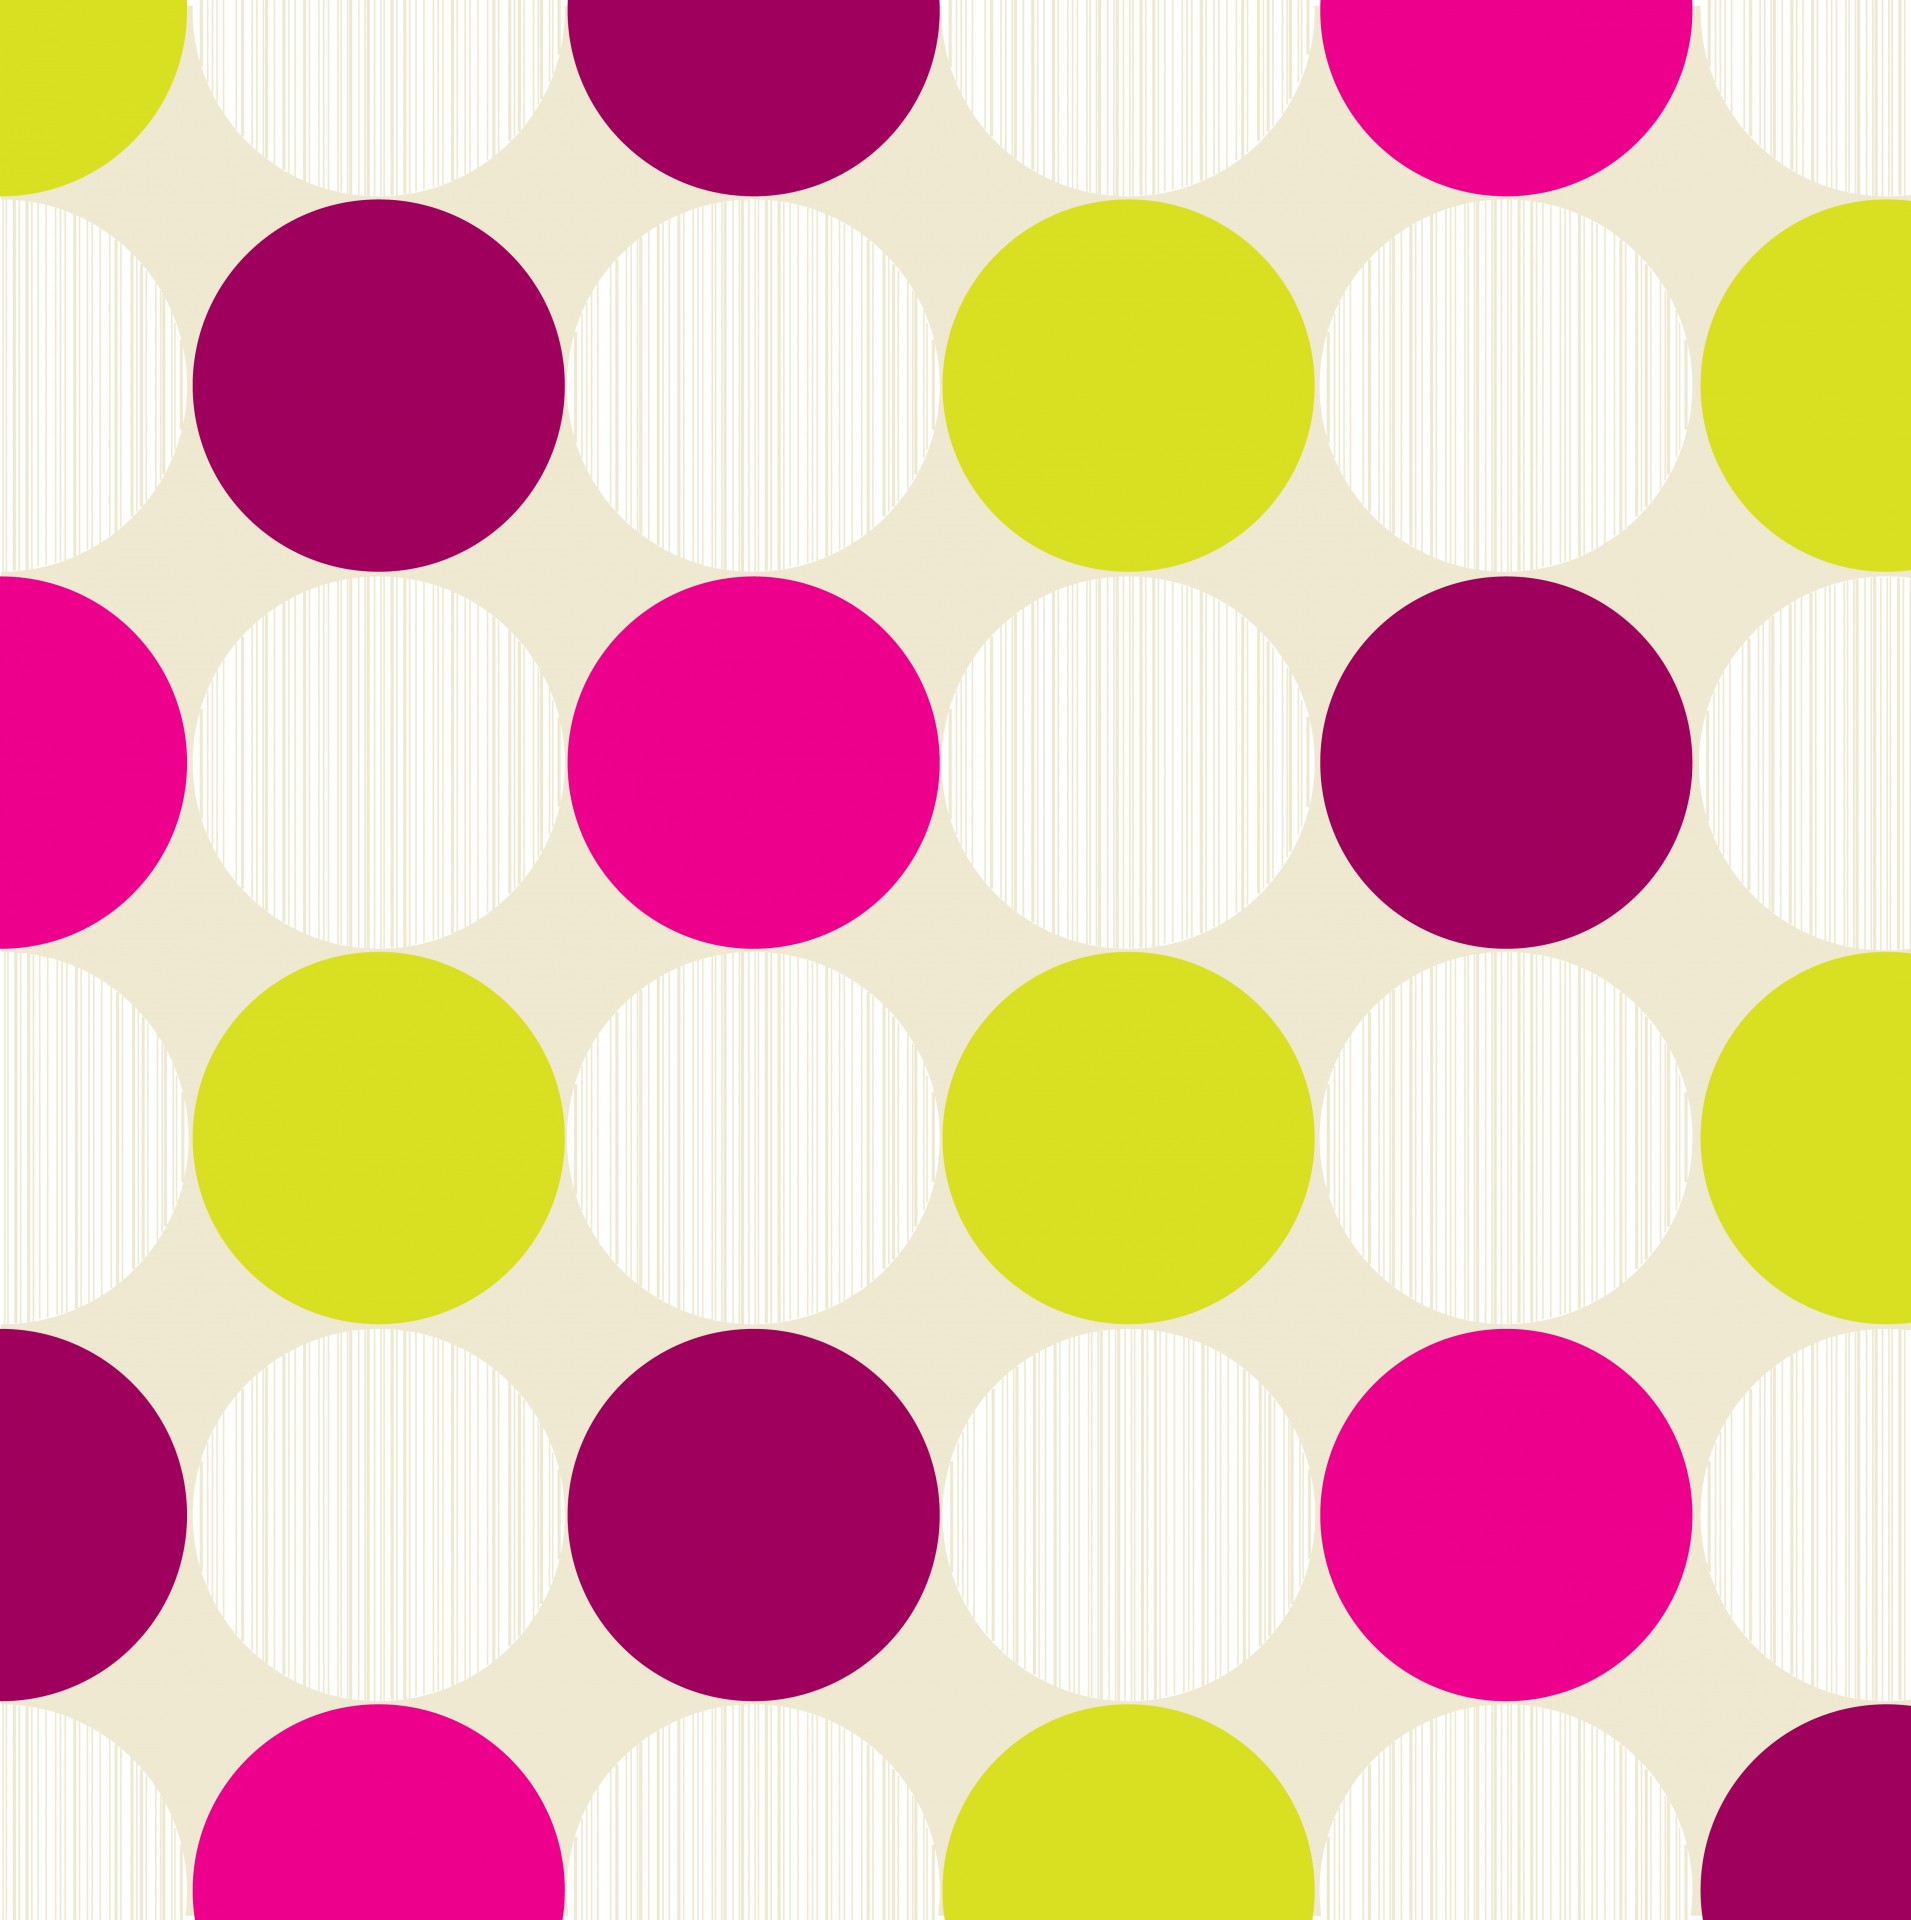 Polka Dots Colorful Background